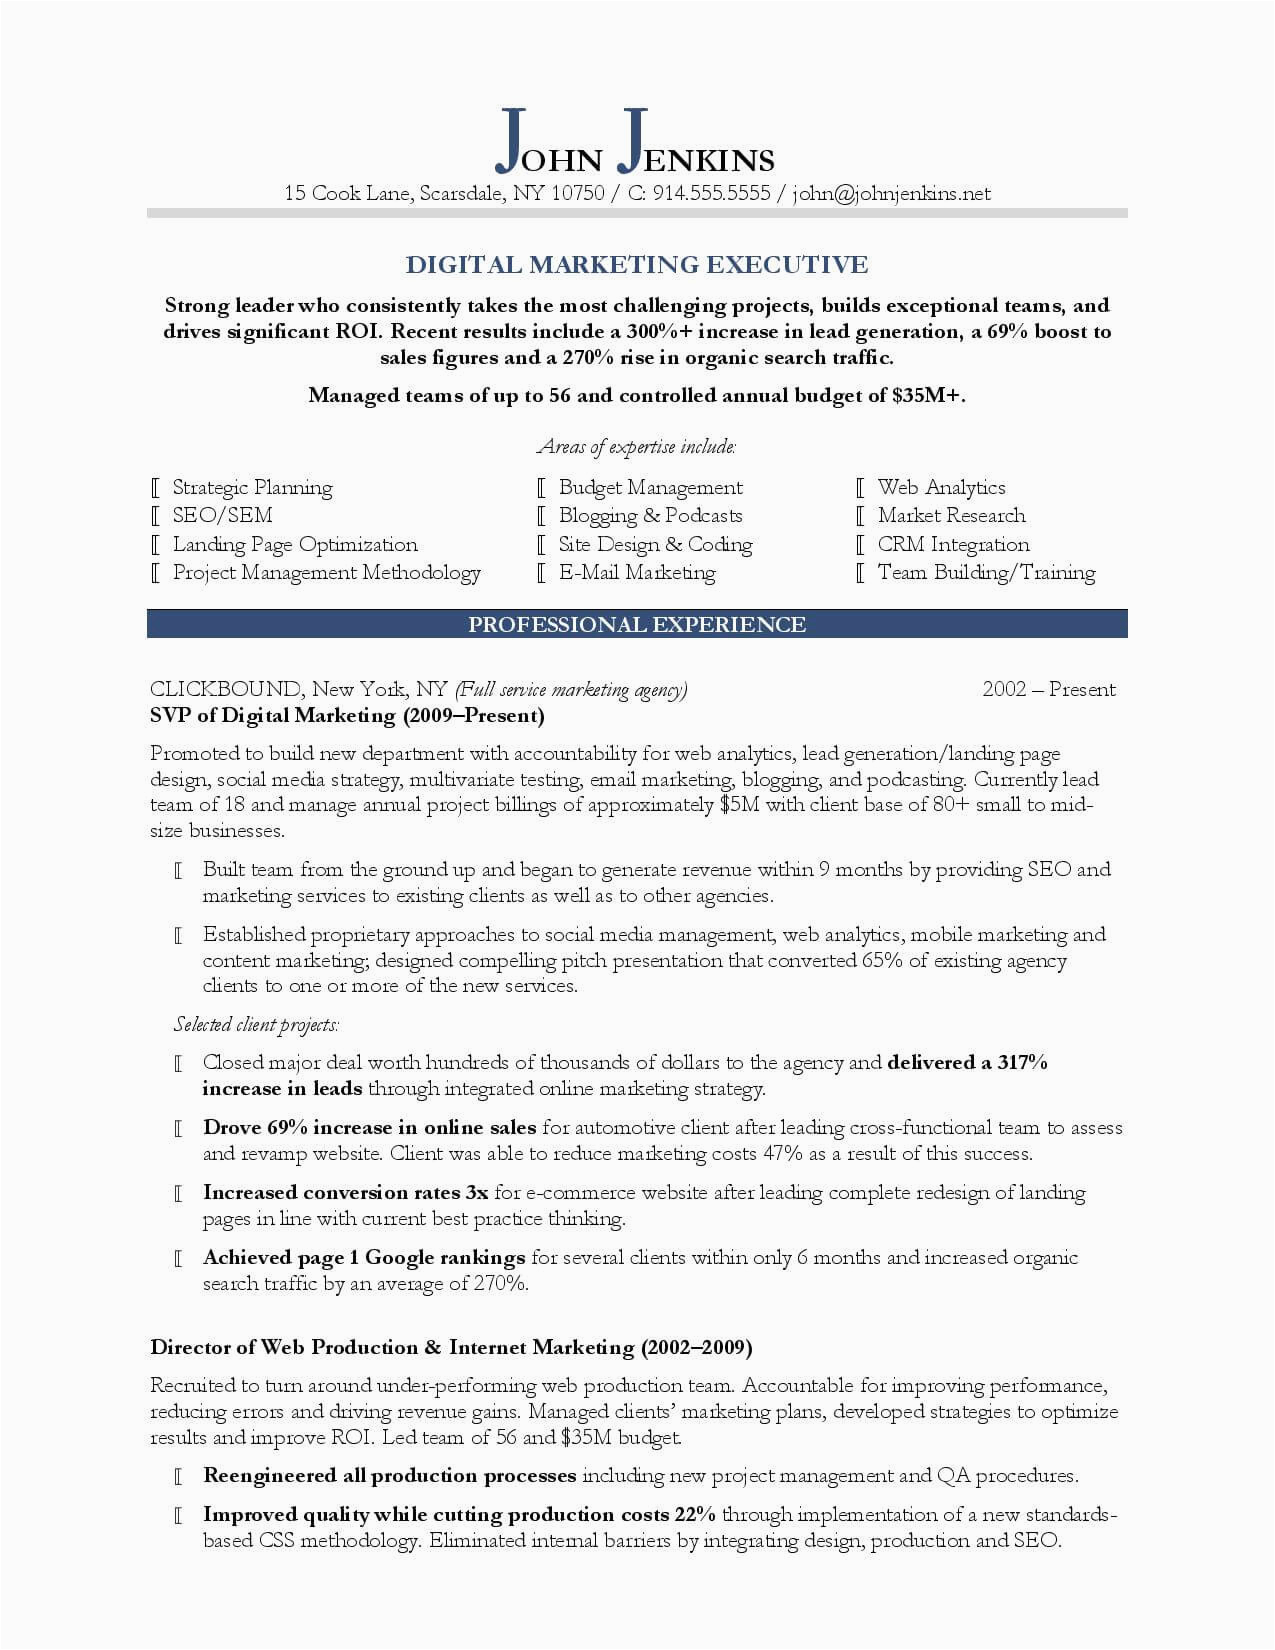 Sample Resume for Digital Marketing Executive 10 Marketing Resume Samples Hiring Managers Will Notice